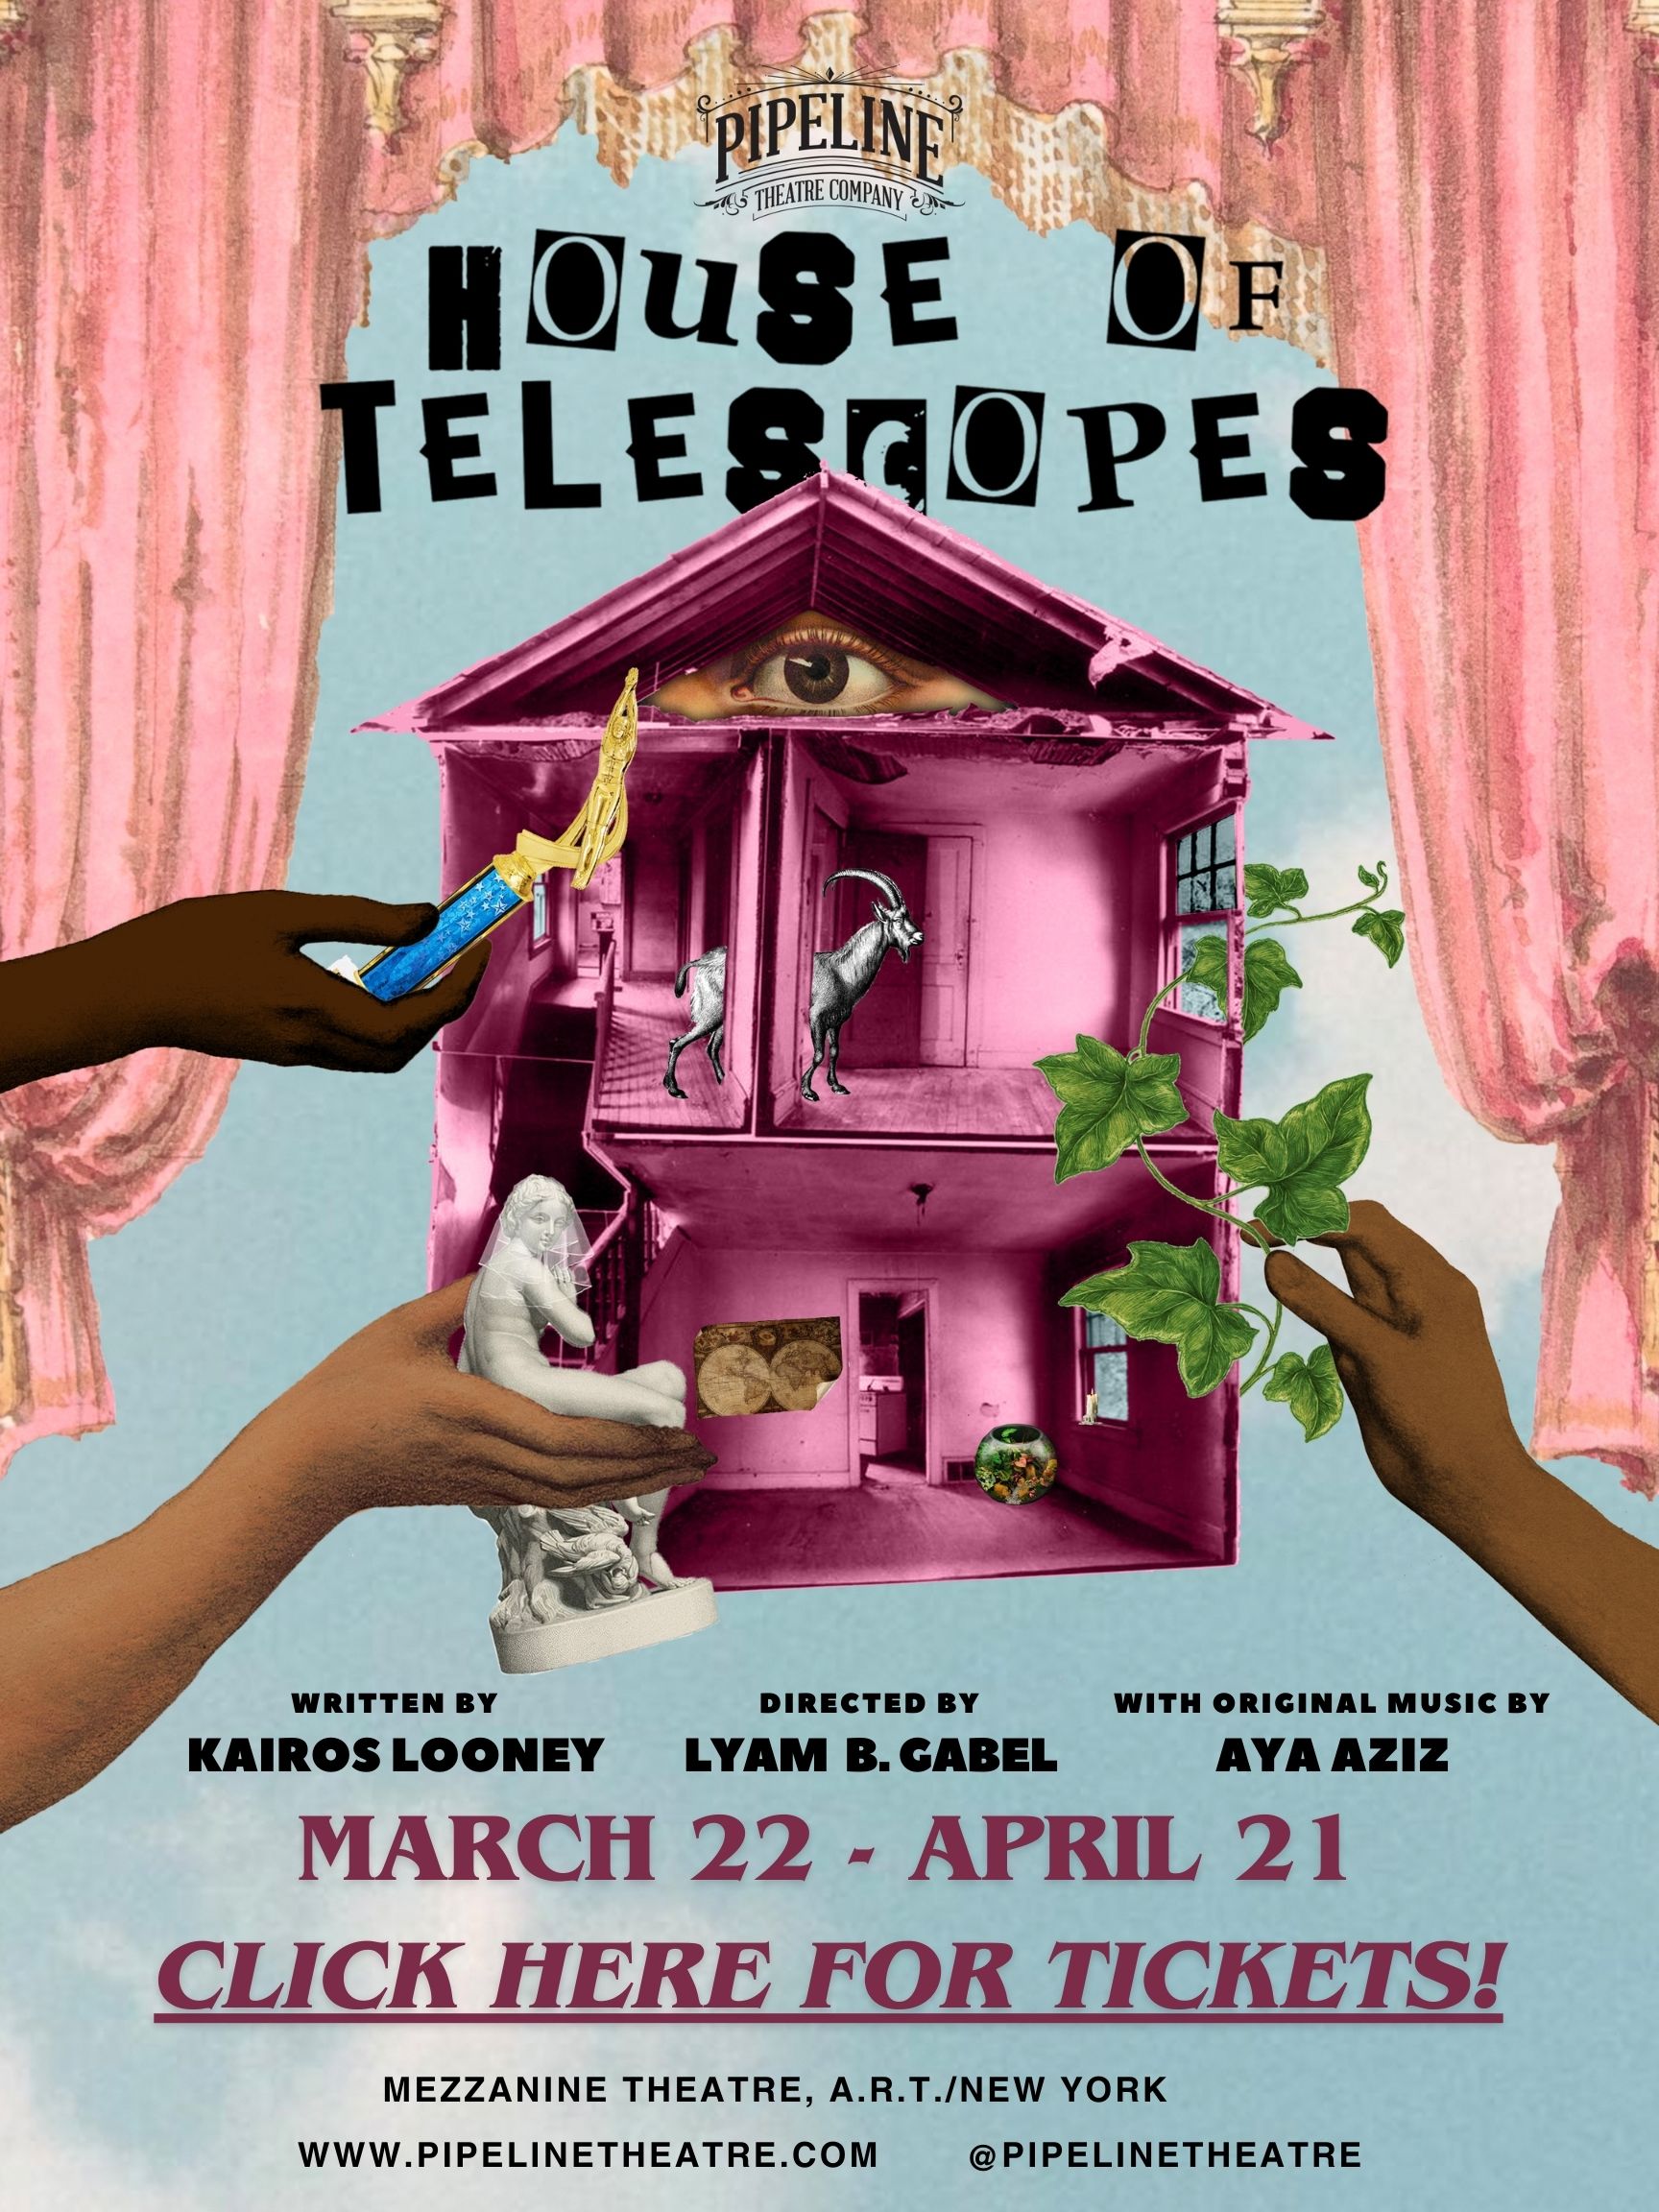 House of Telescopes Tickets on sale through 6/21 Written by Kairos Looney Directed by Lyam B. Gabel Original Music by Aya Aziz Mezzanine Theatre at A.R.T./NY